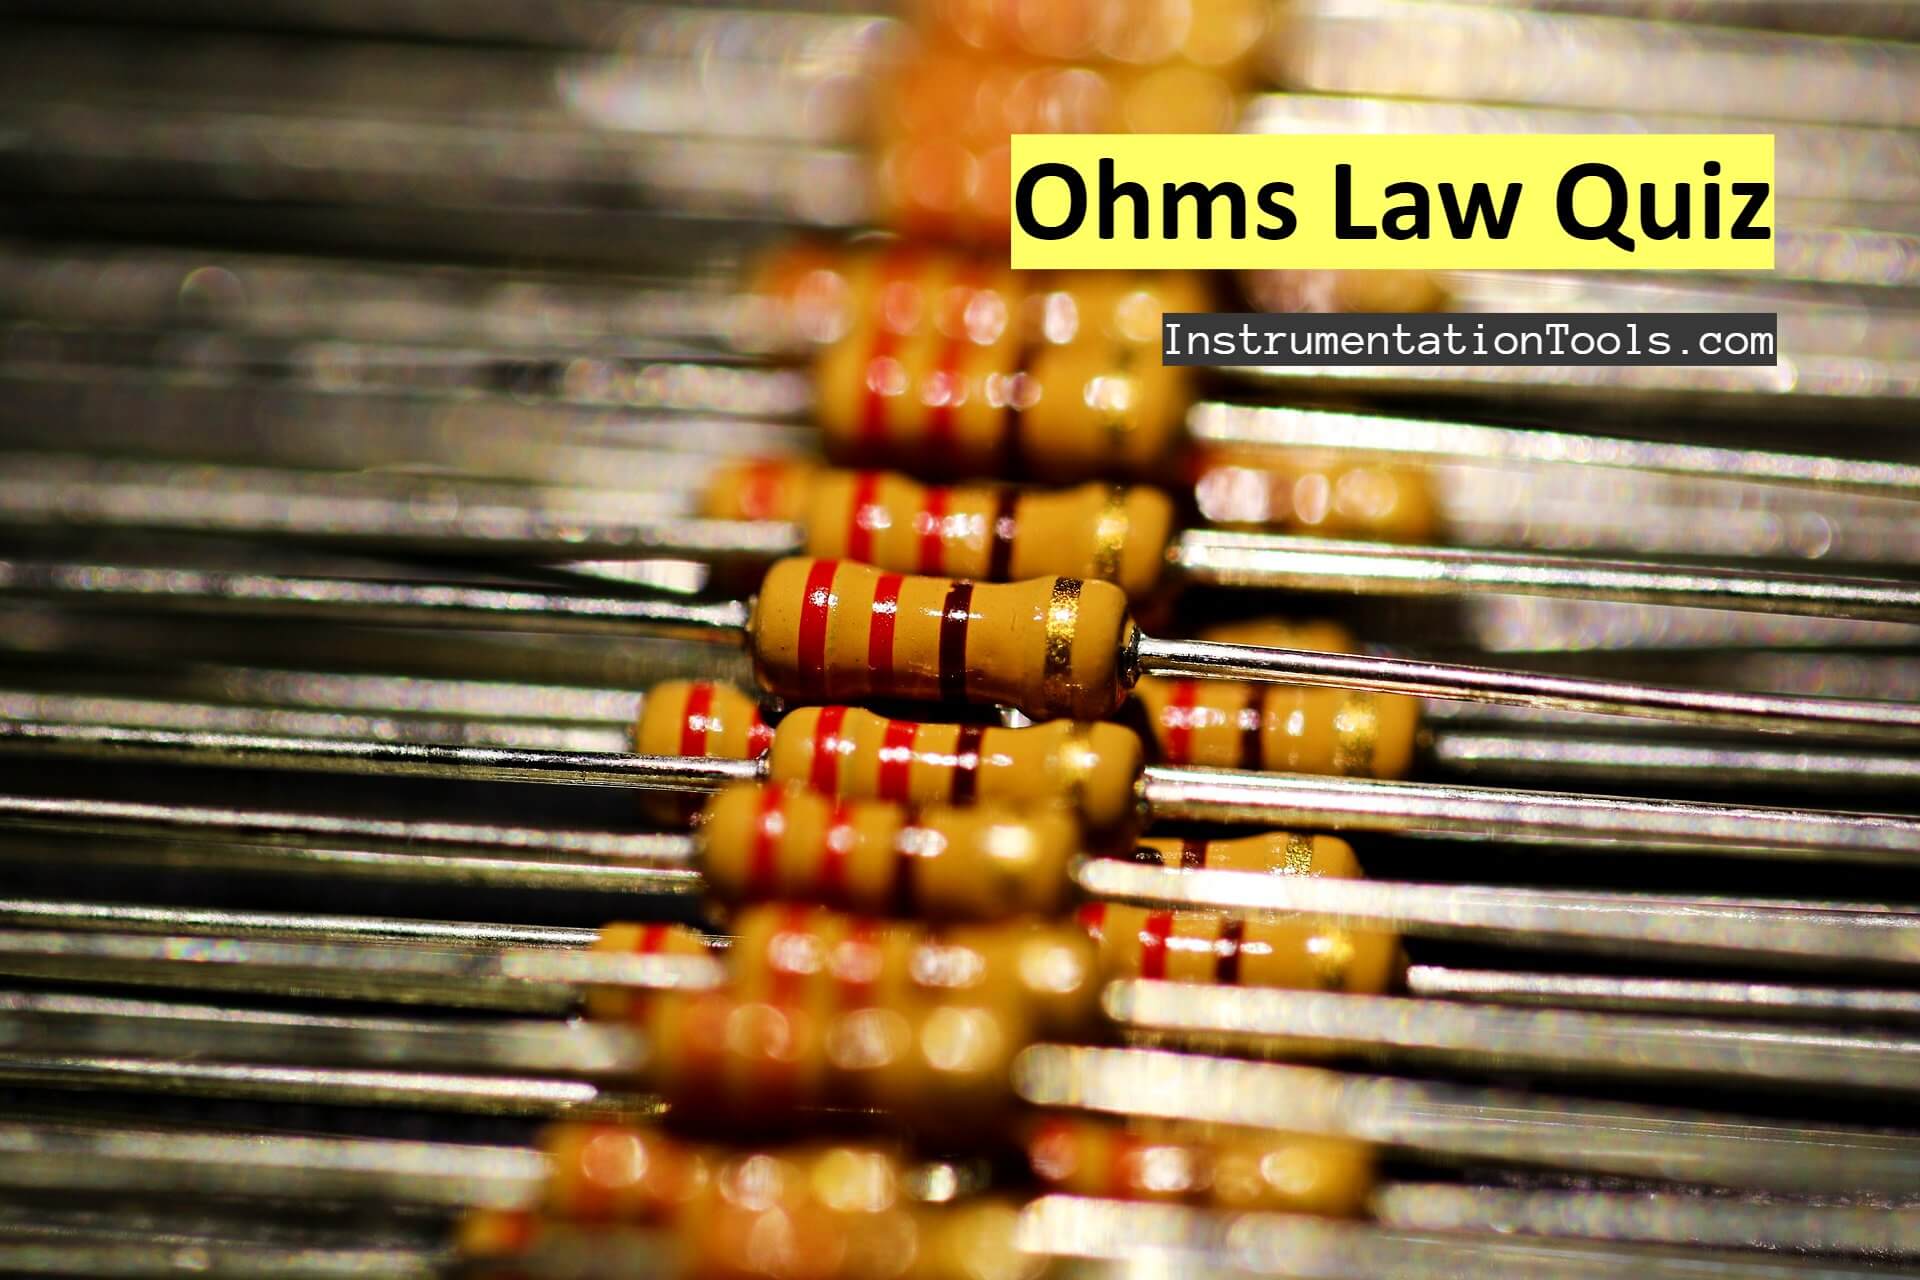 Ohms Law Objective Questions and Answers